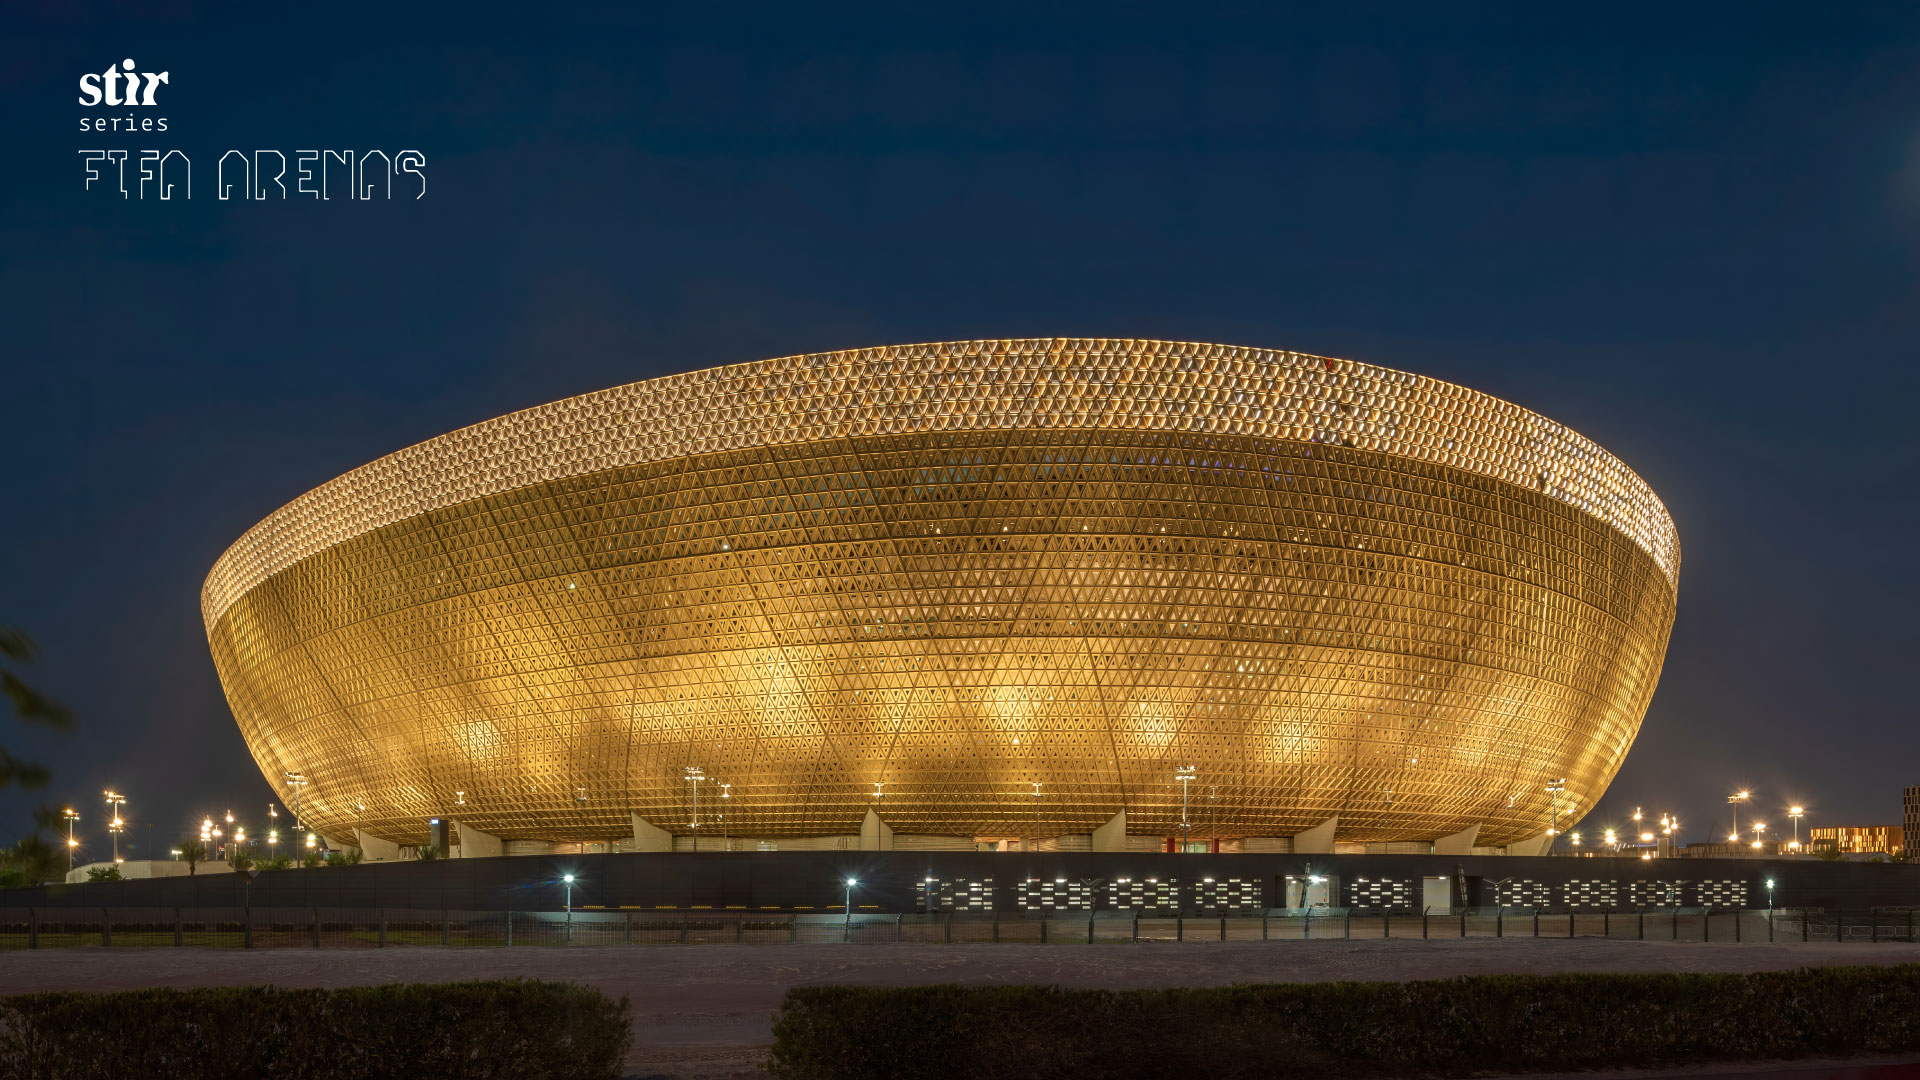 FIFA Arenas: Lusail Stadium by Foster + Partners in Lusail, Qatar